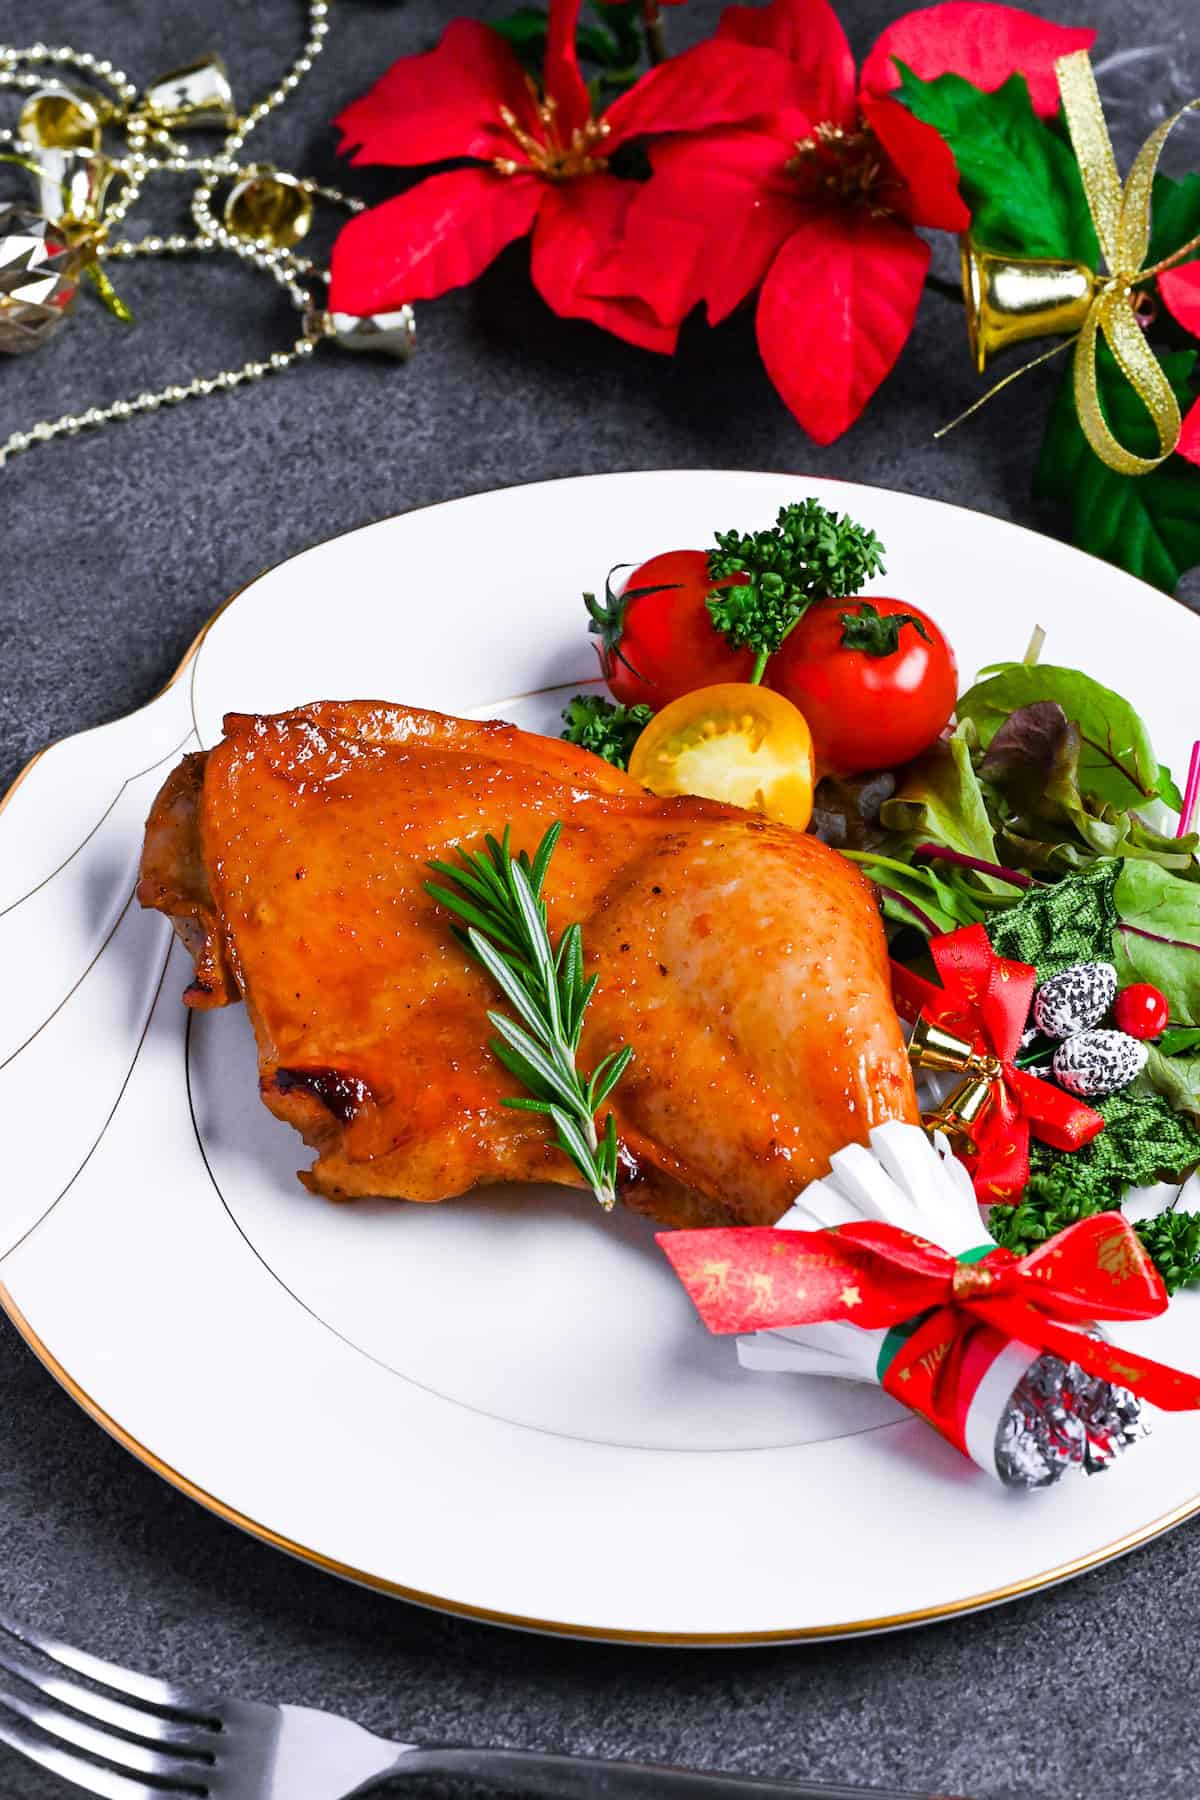 Japanese Christmas Chicken (Roasted Chicken with Soy and Yuzu Glaze) on a white plate topped with a sprig of fresh rosemary next to a simple side salad